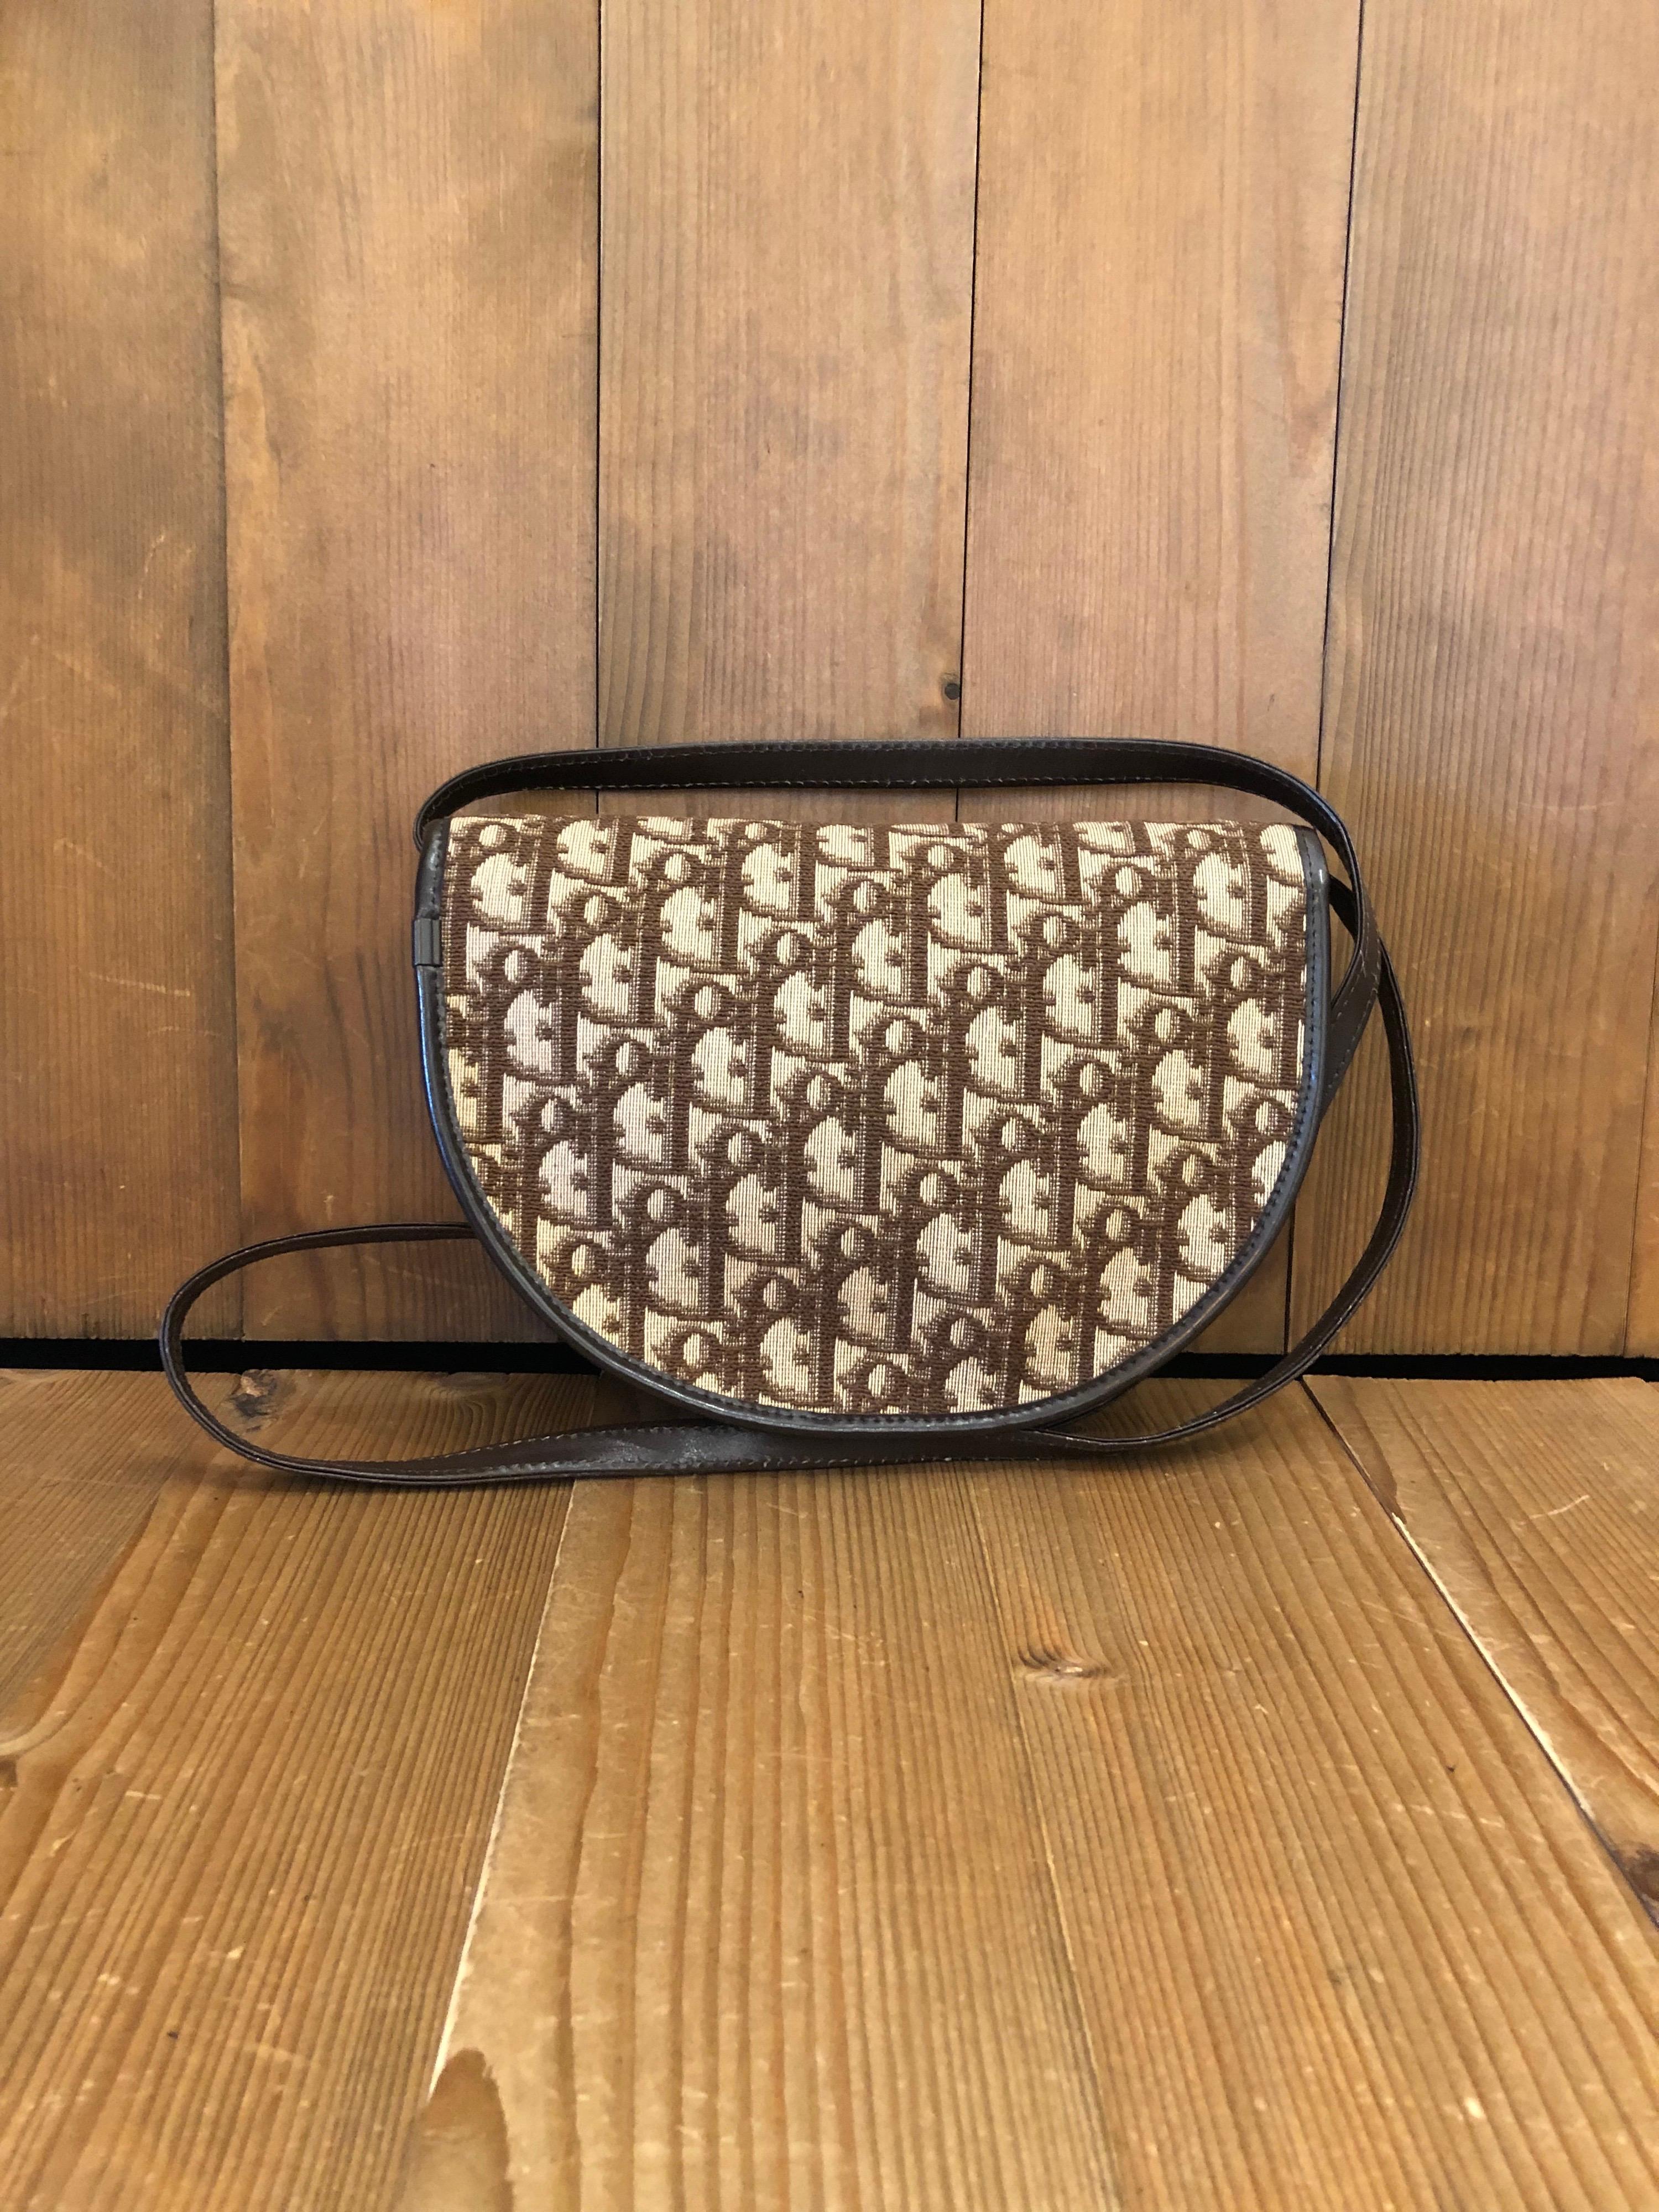 1970s Christian Dior shoulder bag in brown trotter jacquard and leather. Made in France. 
Measures 8.5 x 6.5 x 1 inches Strap drop 21 inches .

Condition - Some signs or wear consistent with age

Outside: Some old keeping marks on jacquard and